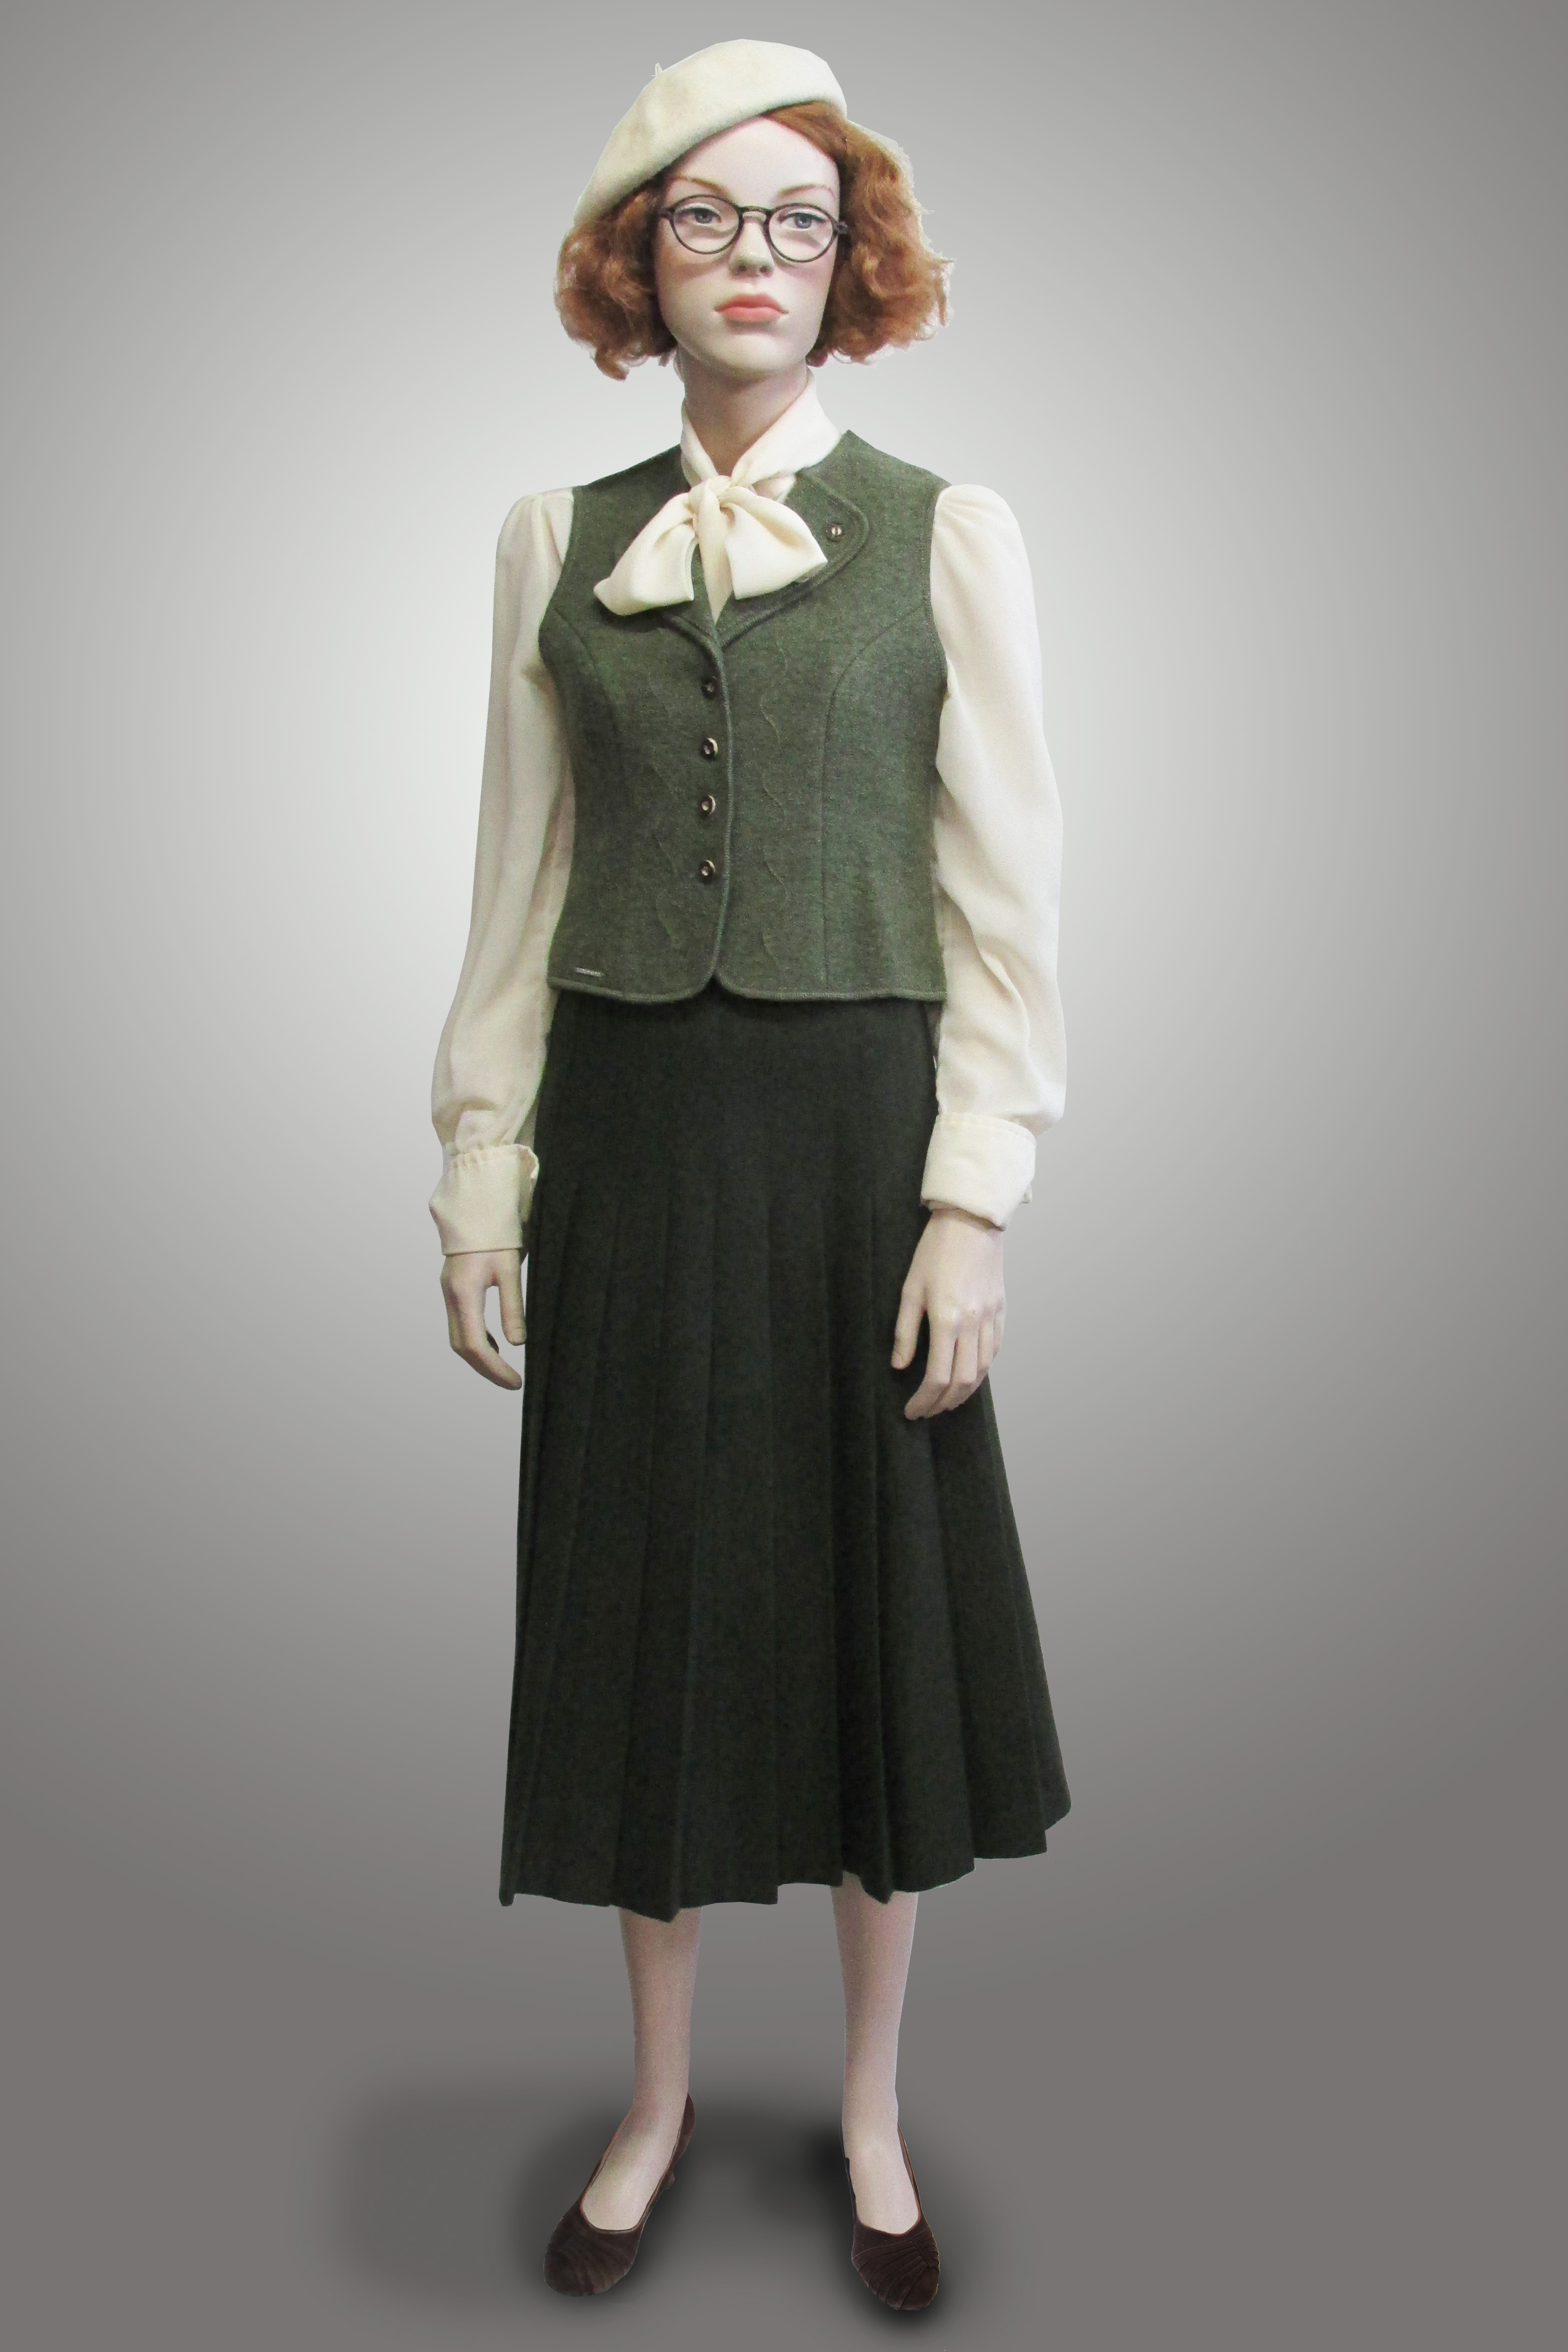 Green Pleated Skirt with Green Waistcoat